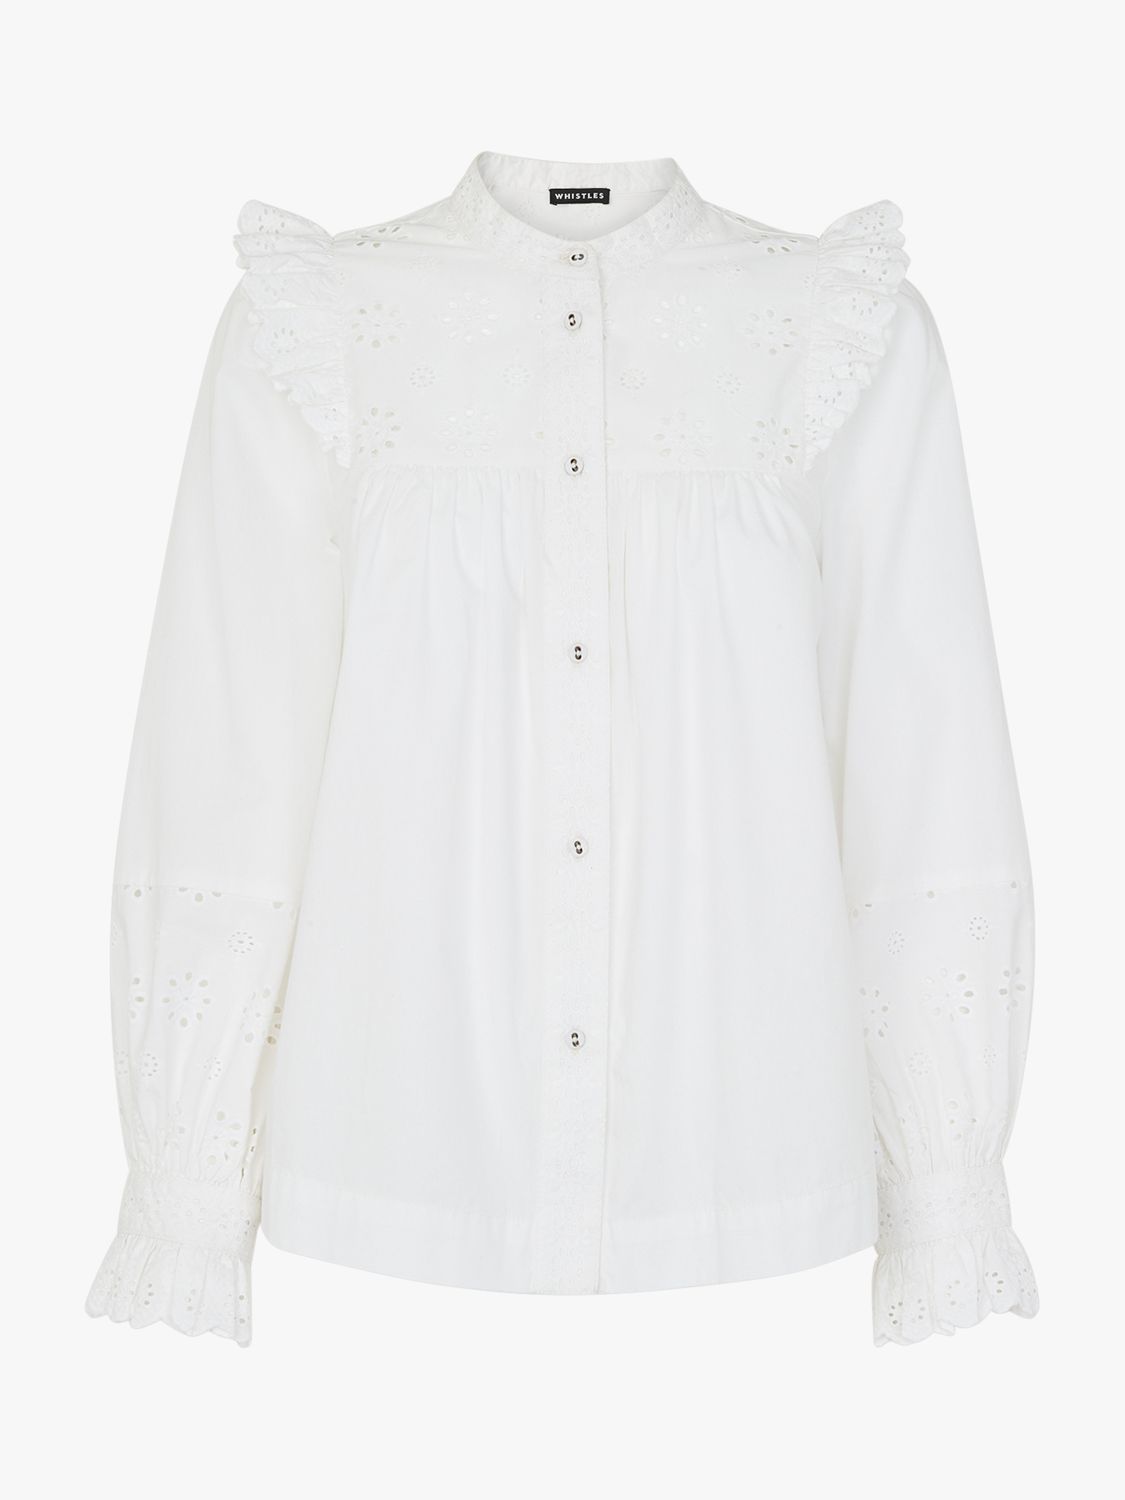 Whistles Broderie Frill Sleeve Top, White at John Lewis & Partners